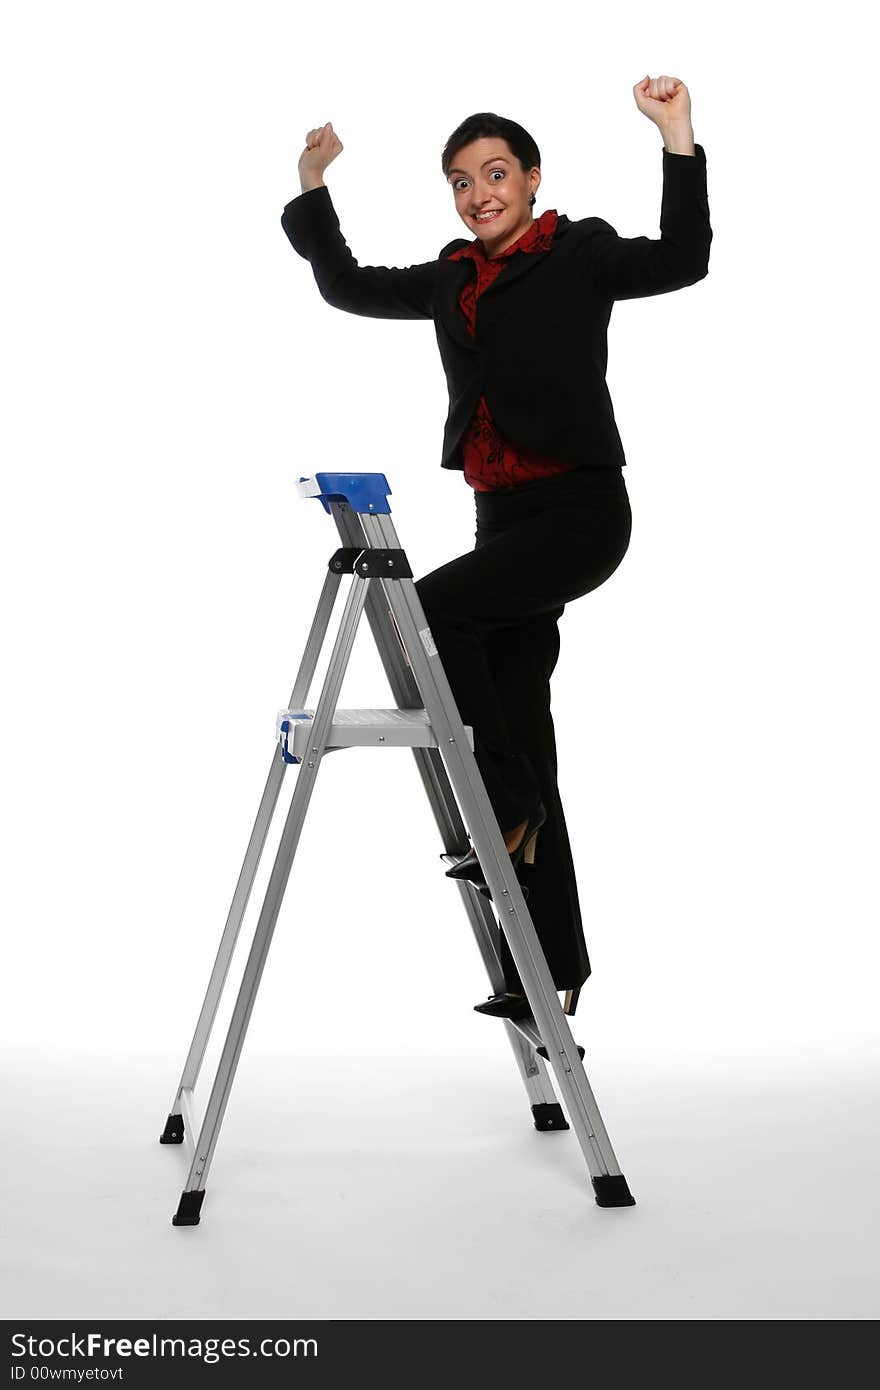 Woman in a business suit climbing up a step ladder with her fists in the air while smiling at the camera. Isolated against a white background. Woman in a business suit climbing up a step ladder with her fists in the air while smiling at the camera. Isolated against a white background